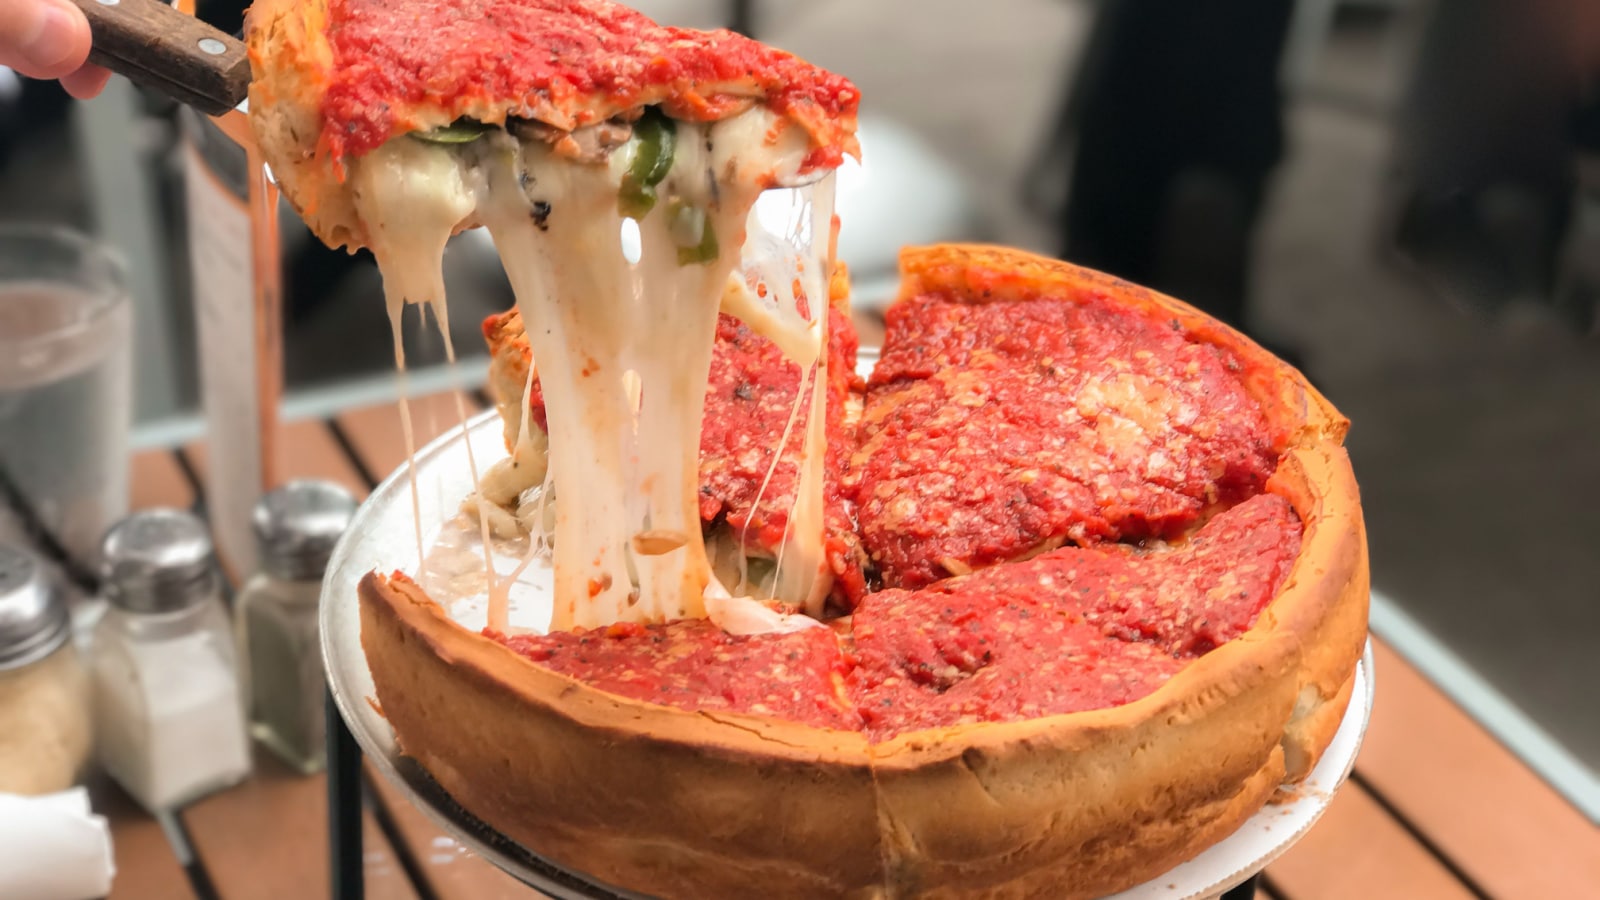 Cheese pizza, Chicago style deep dish italian cheese pizza with tomato sauce.